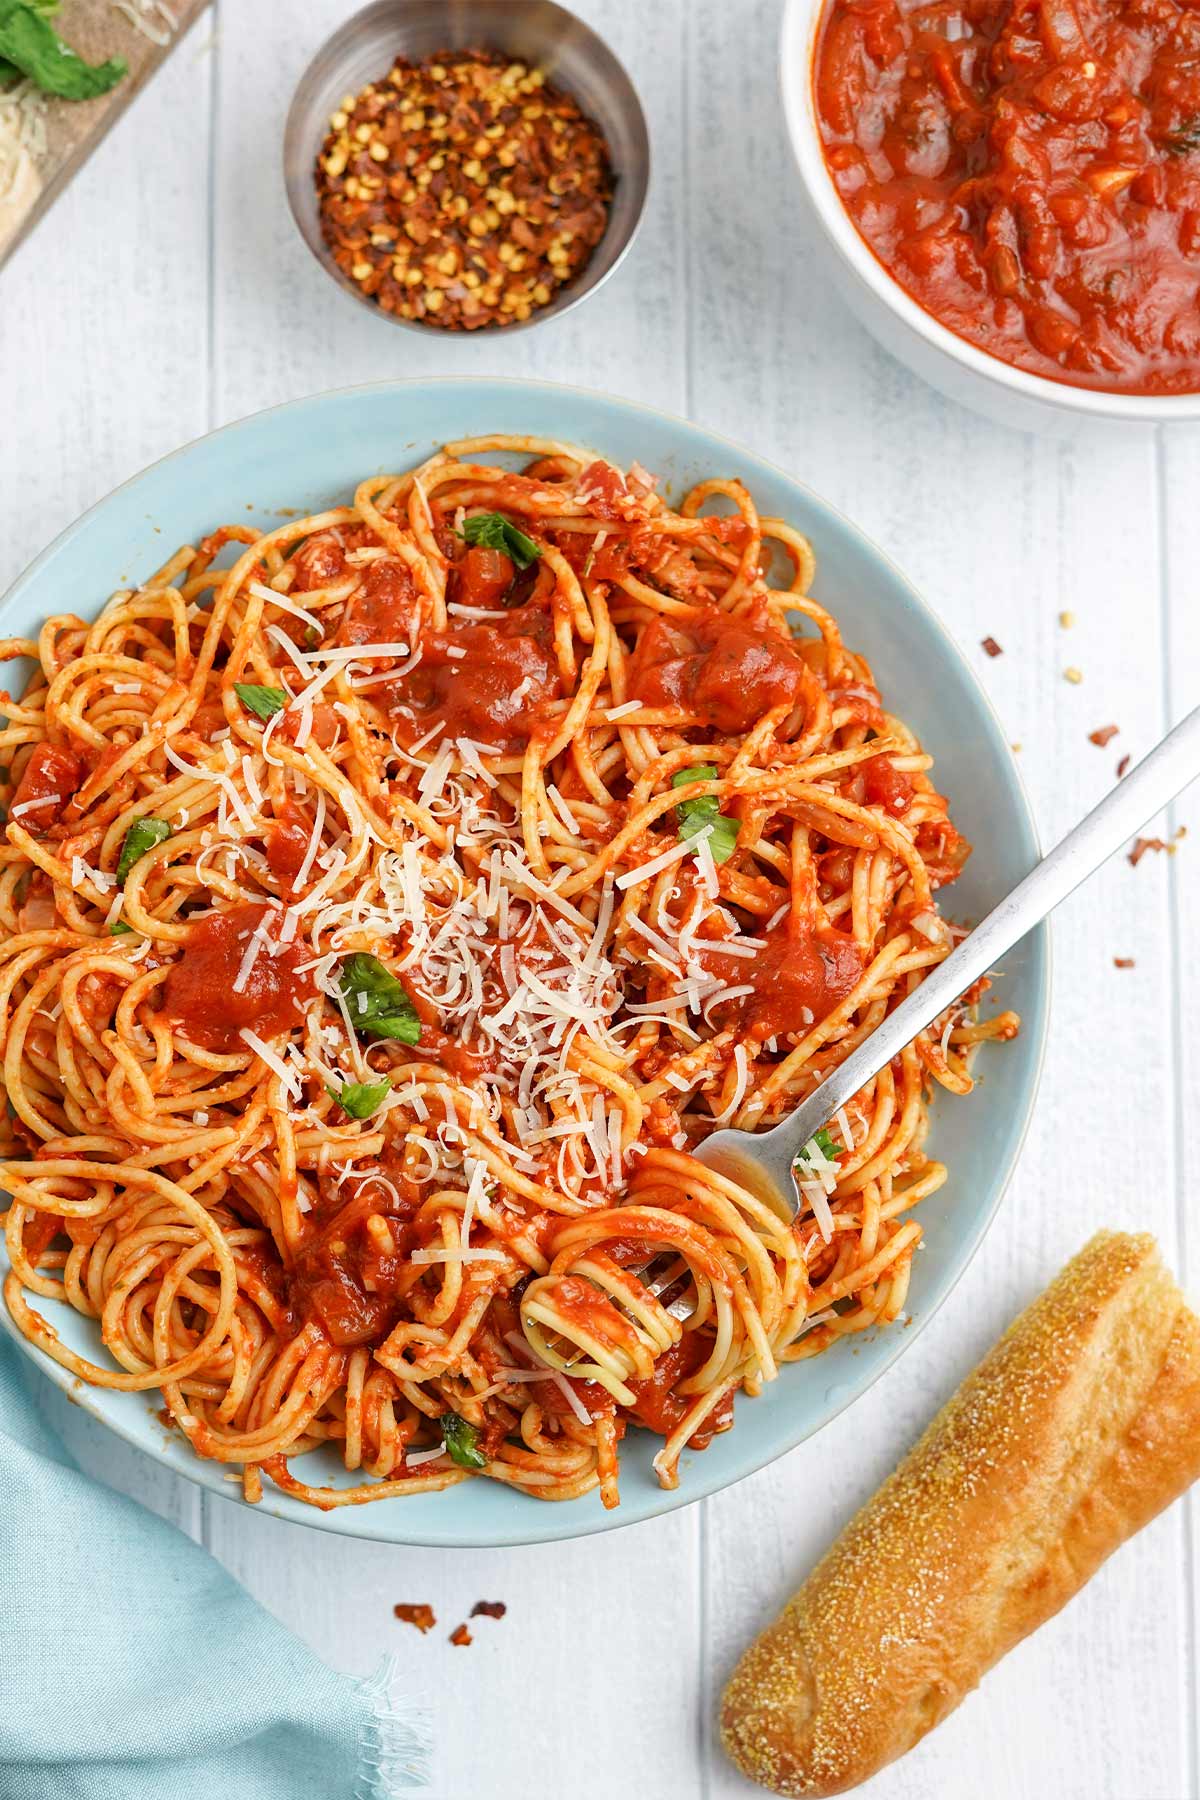 Blue bowl of spaghetti arrabiata on the table with a bowl of sauce and bread.